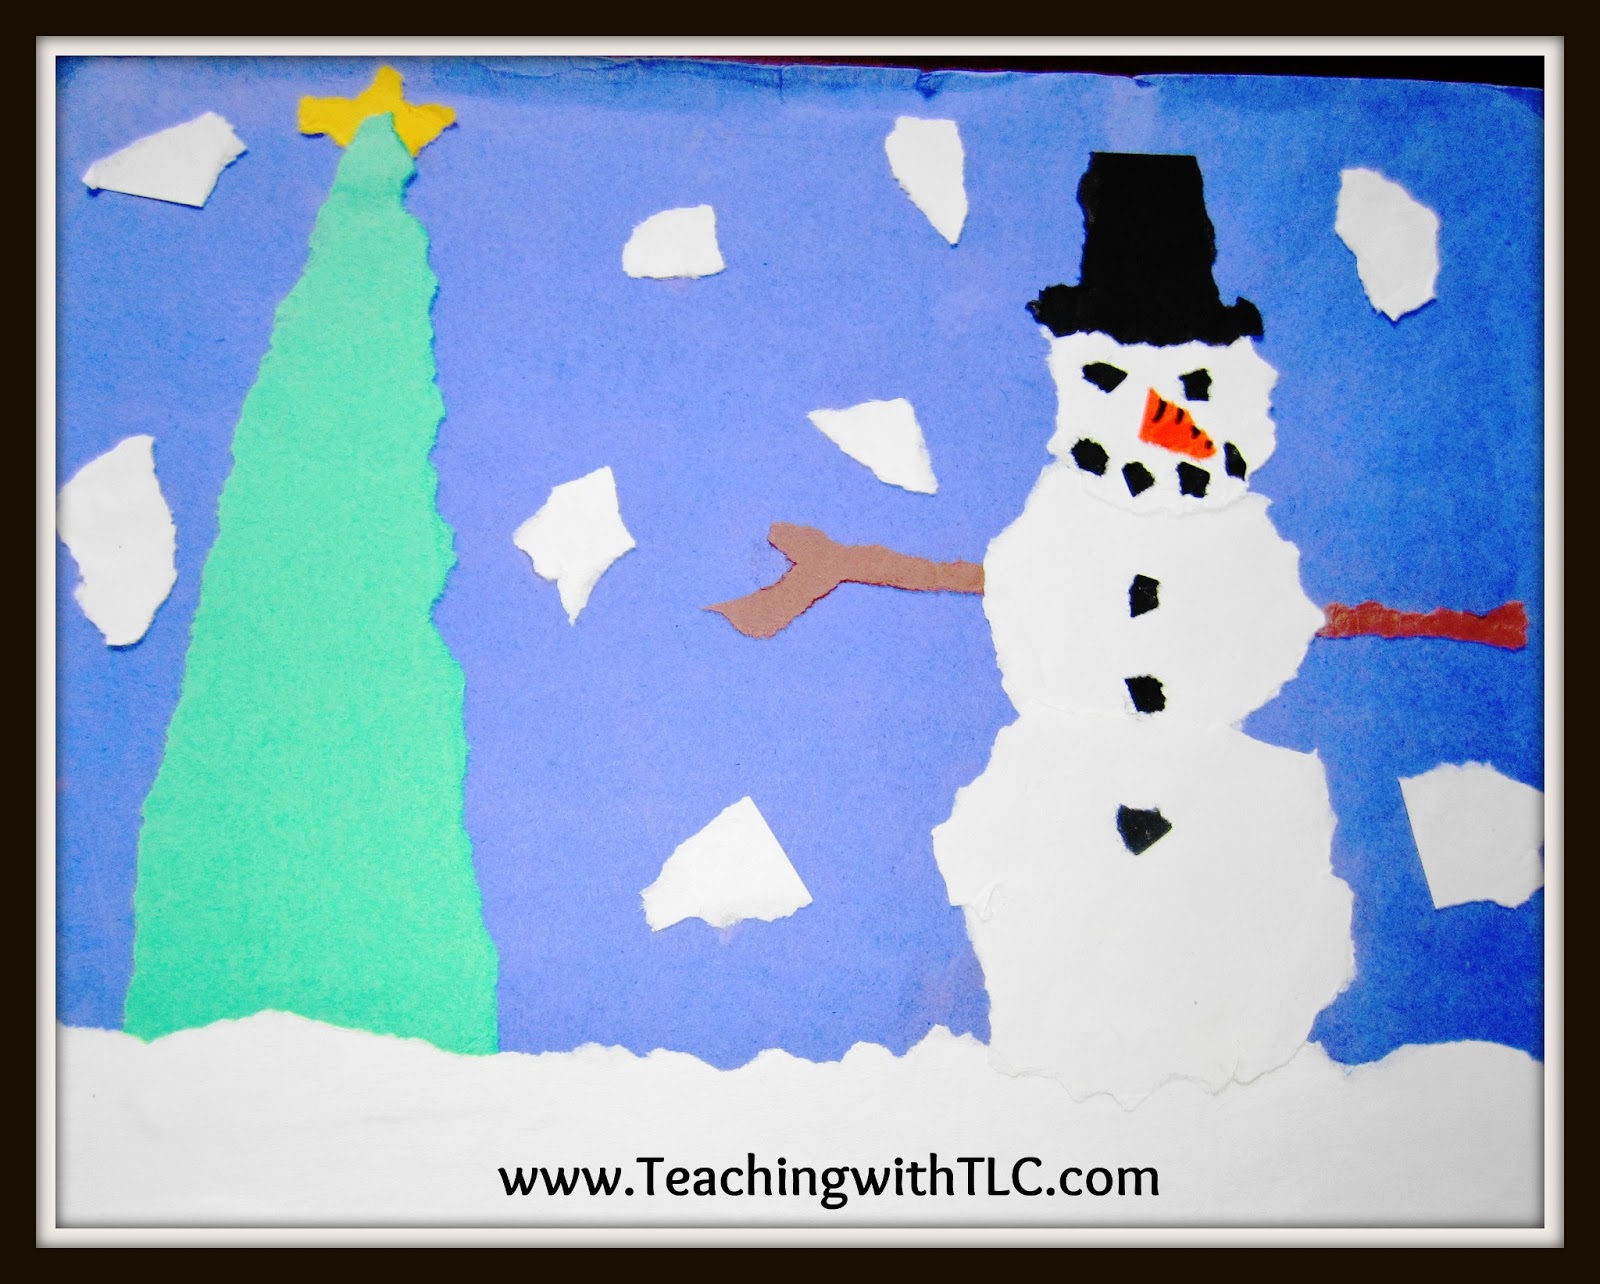 The Kids Also Make Winterscapes Using Crayons And Construction Paper